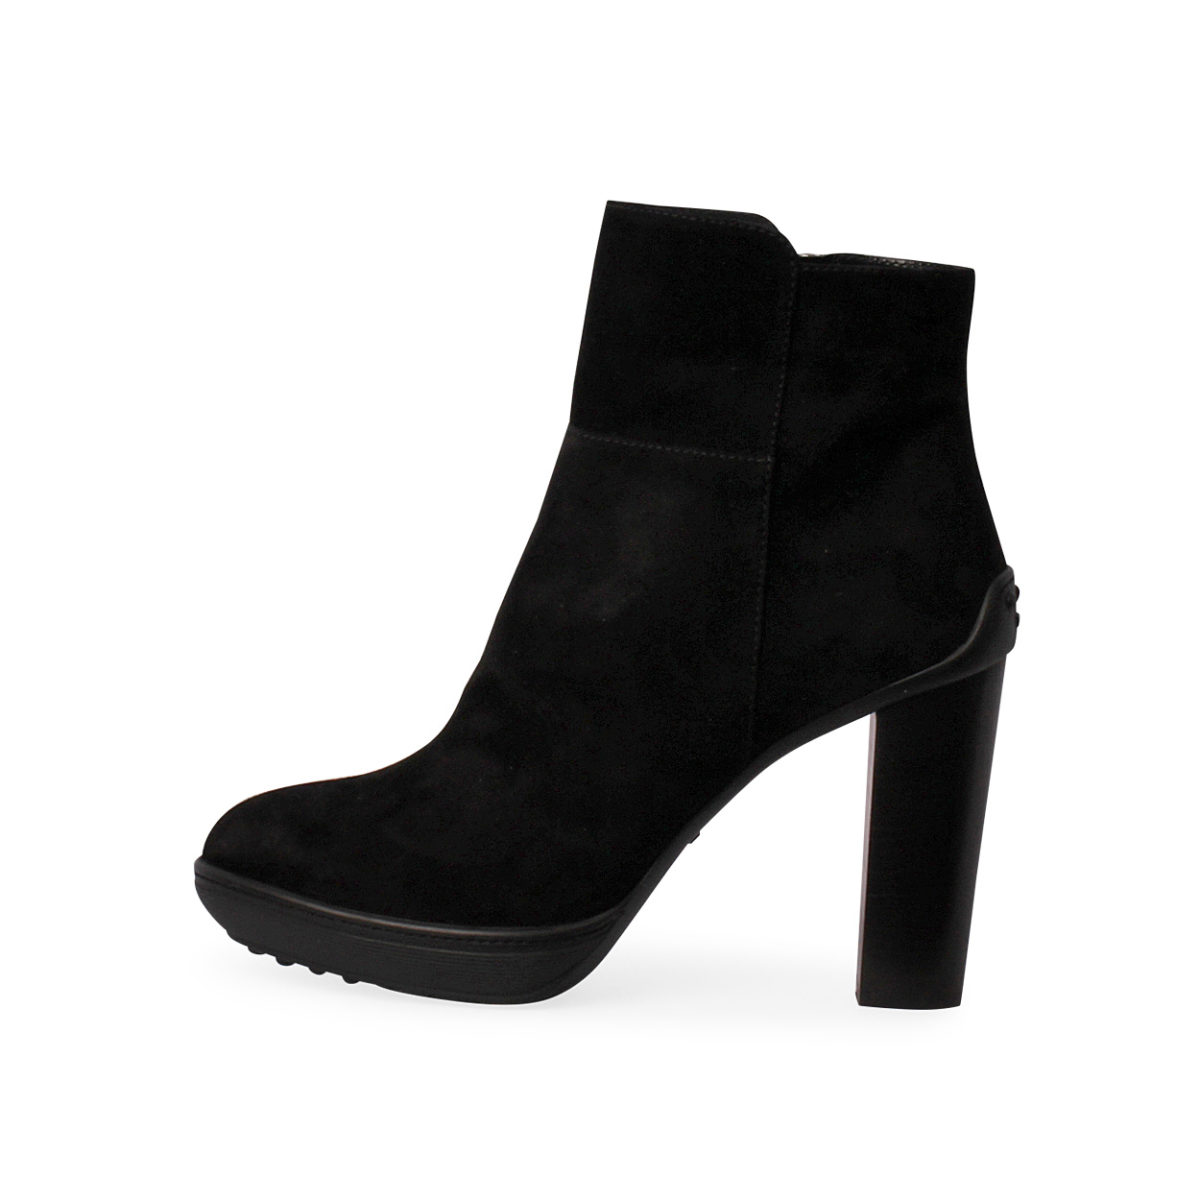 black suede high heel ankle boots